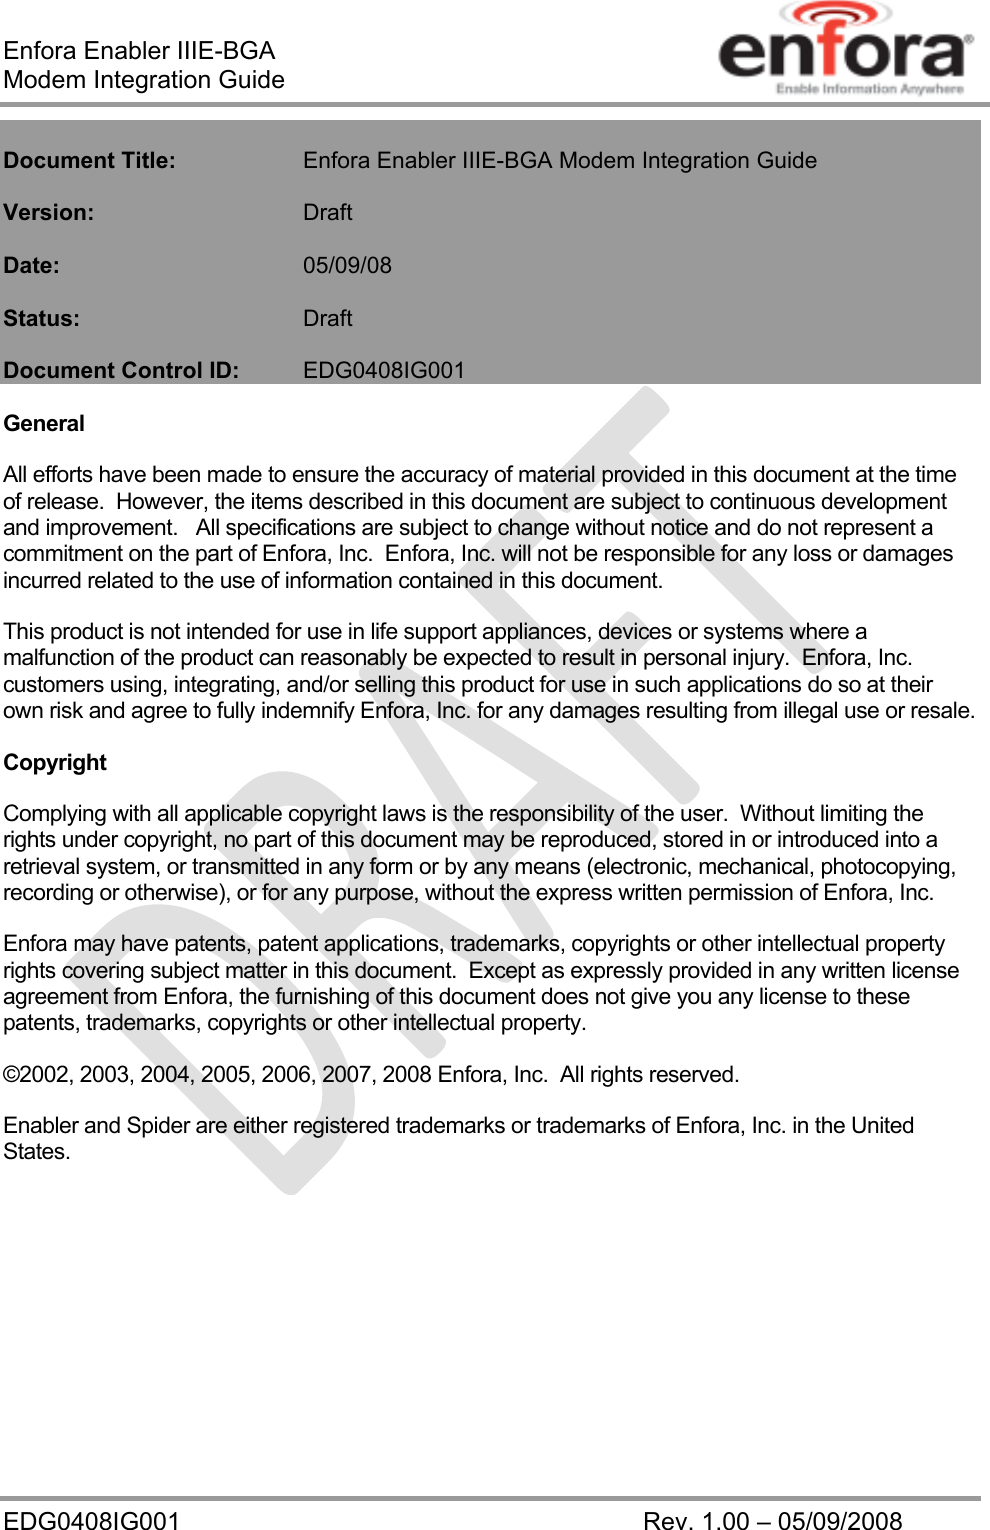 Enfora Enabler IIIE-BGA Modem Integration Guide EDG0408IG001    Rev. 1.00 – 05/09/2008    Document Title:   Enfora Enabler IIIE-BGA Modem Integration Guide  Version:   Draft  Date:     05/09/08  Status:    Draft  Document Control ID:  EDG0408IG001  General All efforts have been made to ensure the accuracy of material provided in this document at the time of release.  However, the items described in this document are subject to continuous development and improvement.   All specifications are subject to change without notice and do not represent a commitment on the part of Enfora, Inc.  Enfora, Inc. will not be responsible for any loss or damages incurred related to the use of information contained in this document. This product is not intended for use in life support appliances, devices or systems where a malfunction of the product can reasonably be expected to result in personal injury.  Enfora, Inc. customers using, integrating, and/or selling this product for use in such applications do so at their own risk and agree to fully indemnify Enfora, Inc. for any damages resulting from illegal use or resale. Copyright Complying with all applicable copyright laws is the responsibility of the user.  Without limiting the rights under copyright, no part of this document may be reproduced, stored in or introduced into a retrieval system, or transmitted in any form or by any means (electronic, mechanical, photocopying, recording or otherwise), or for any purpose, without the express written permission of Enfora, Inc. Enfora may have patents, patent applications, trademarks, copyrights or other intellectual property rights covering subject matter in this document.  Except as expressly provided in any written license agreement from Enfora, the furnishing of this document does not give you any license to these patents, trademarks, copyrights or other intellectual property. ©2002, 2003, 2004, 2005, 2006, 2007, 2008 Enfora, Inc.  All rights reserved. Enabler and Spider are either registered trademarks or trademarks of Enfora, Inc. in the United States.  